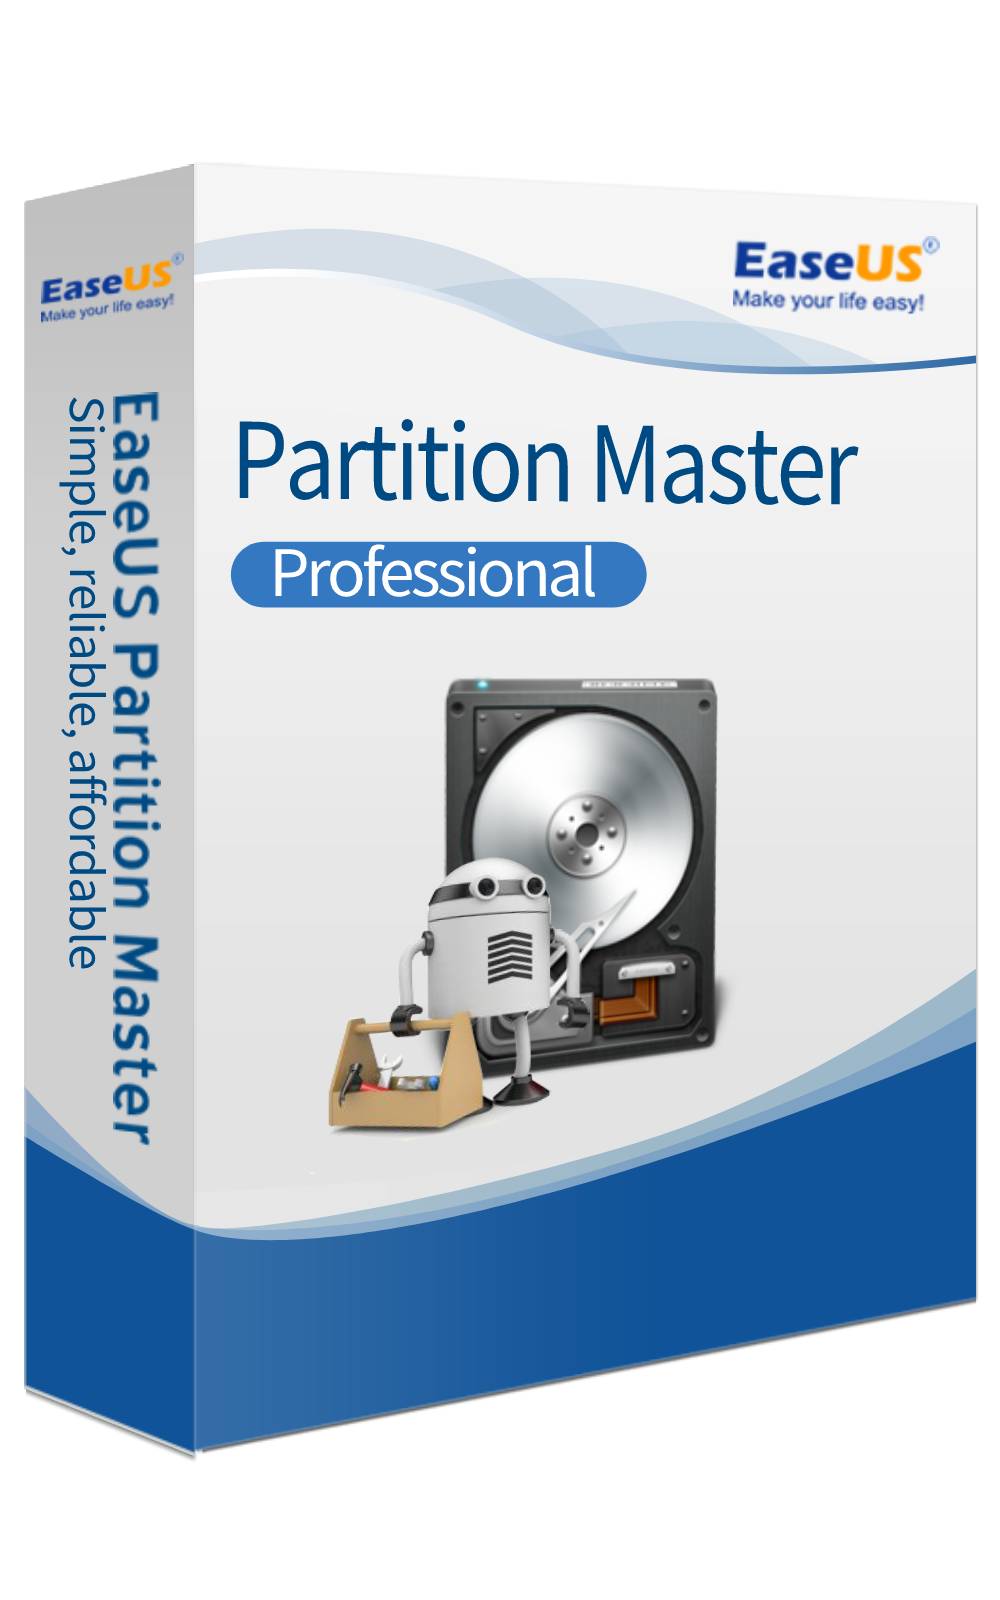 EaseUS Software EaseUS Partition Master Professional (paid for the major upgrade)